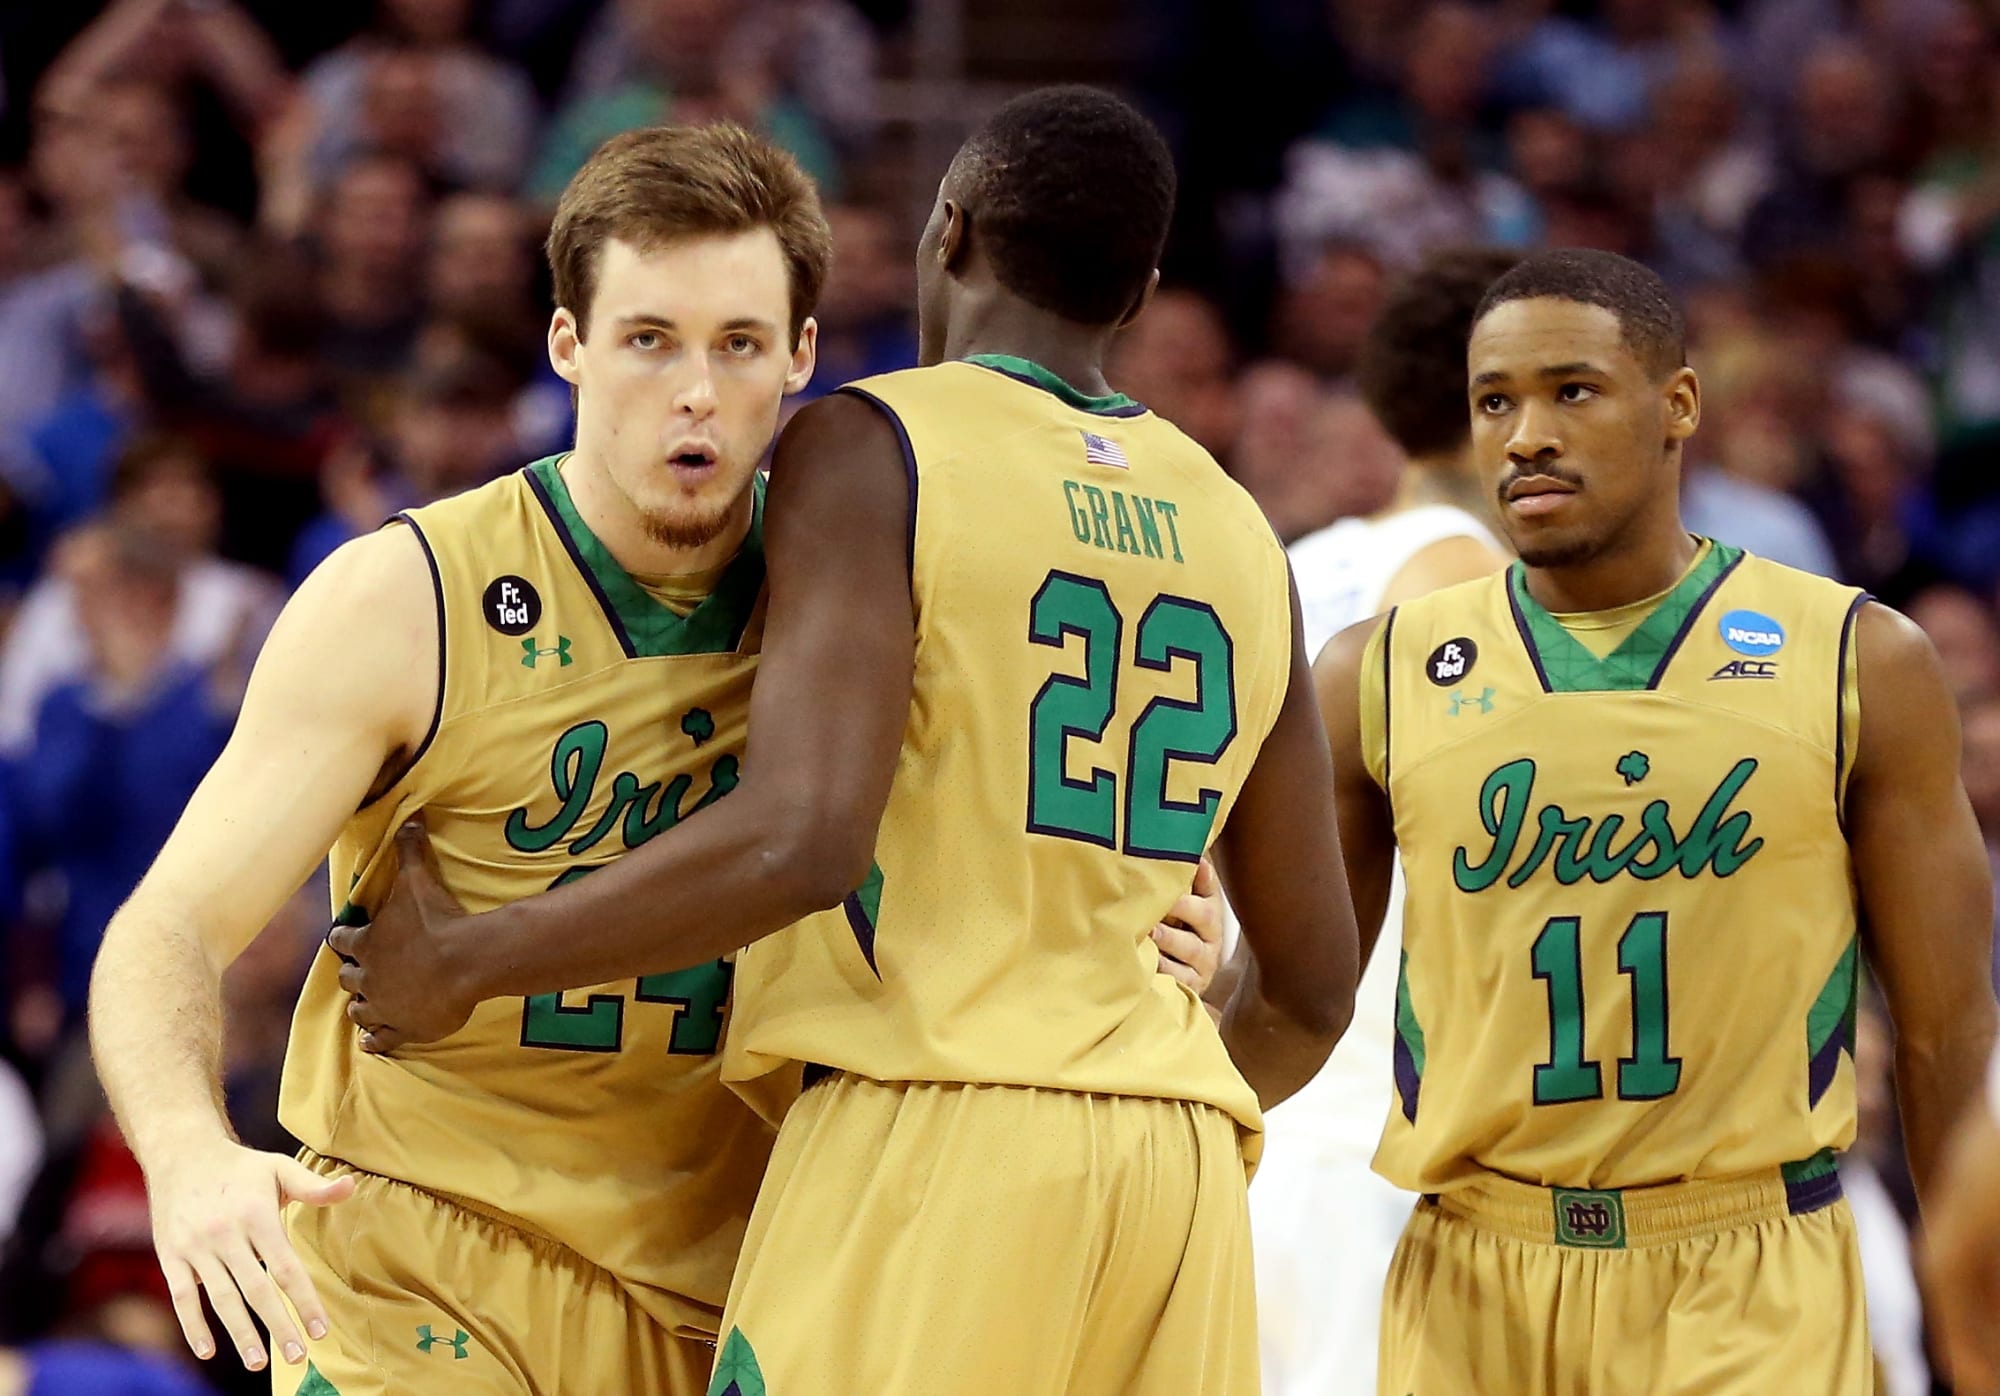 Notre Dame Basketball: Former Irish Players Find Success In The NBA